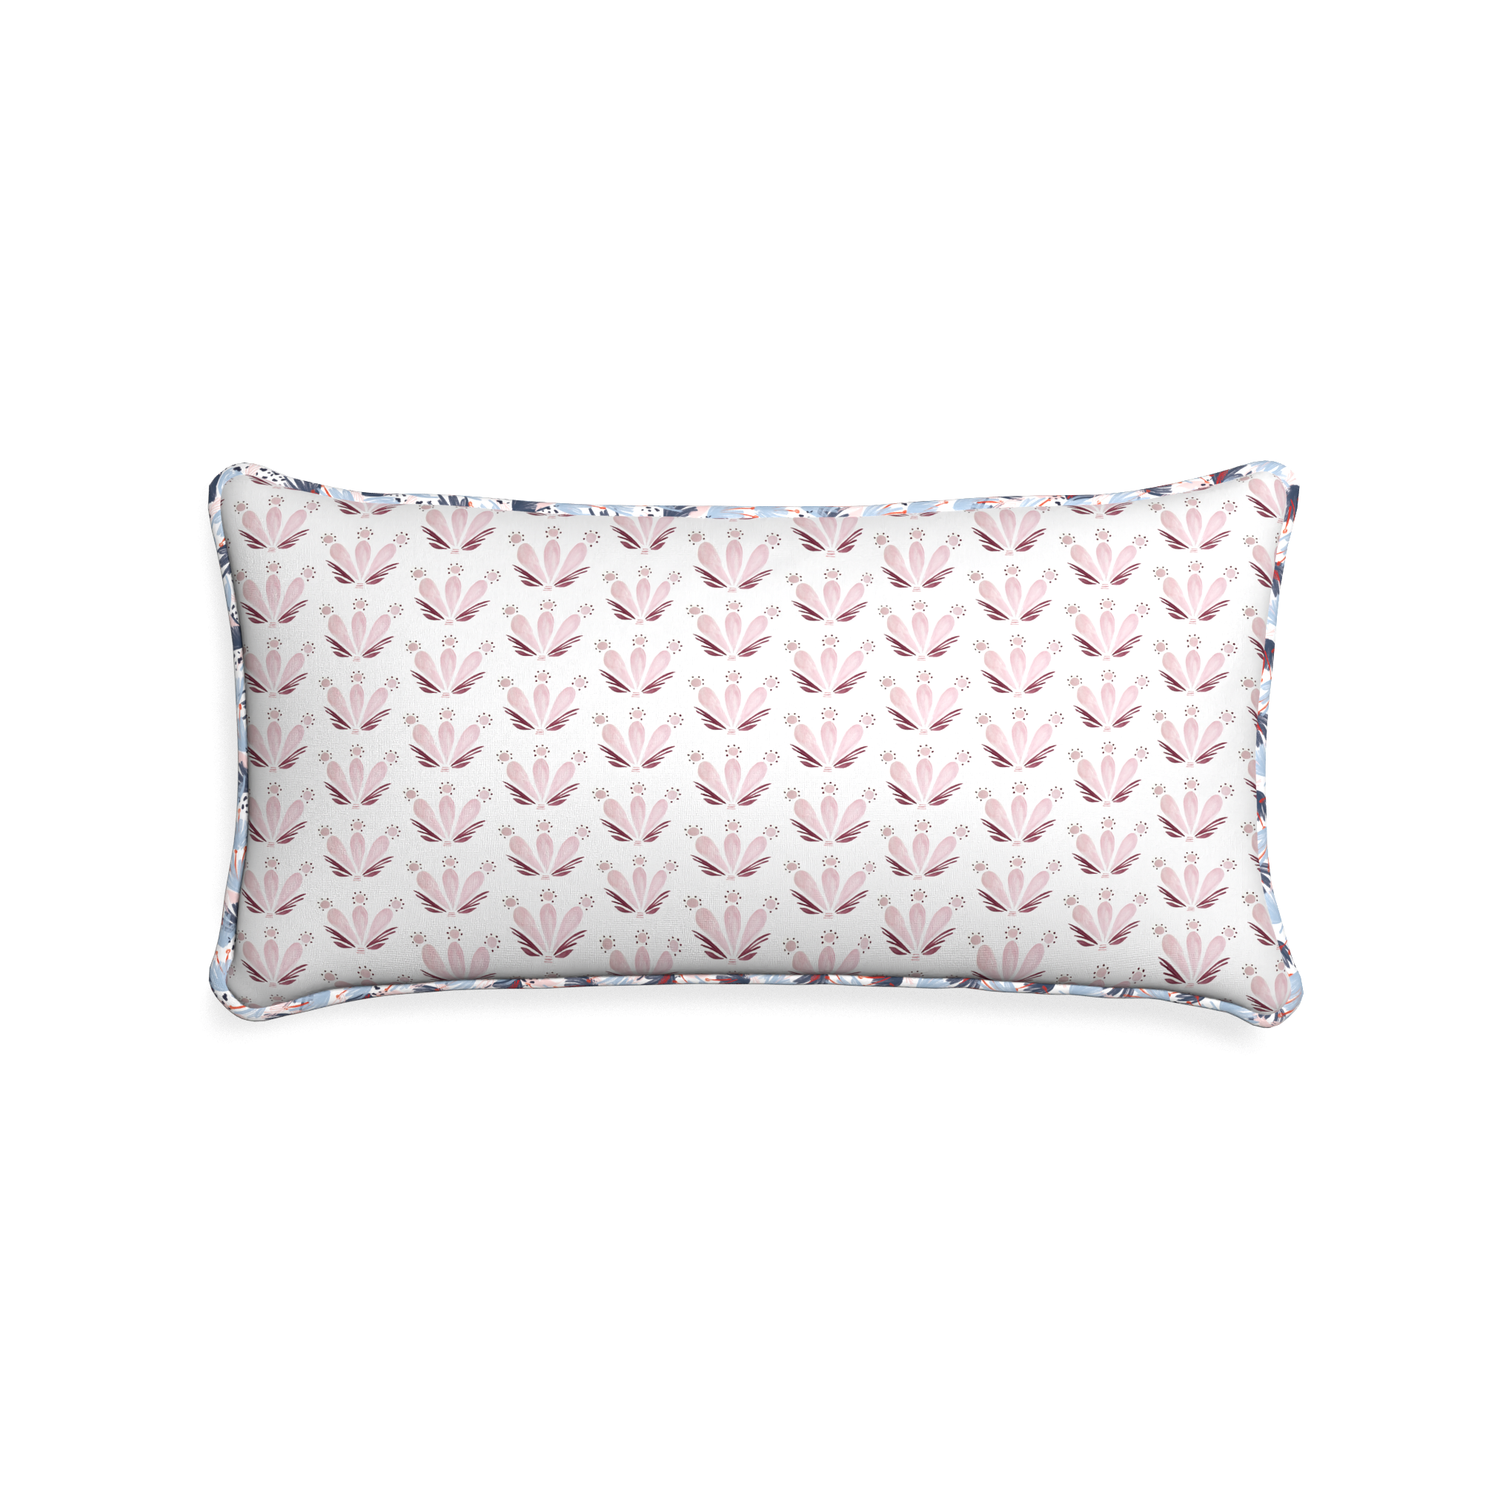 Midi-lumbar serena pink custom pink & burgundy drop repeat floralpillow with e piping on white background